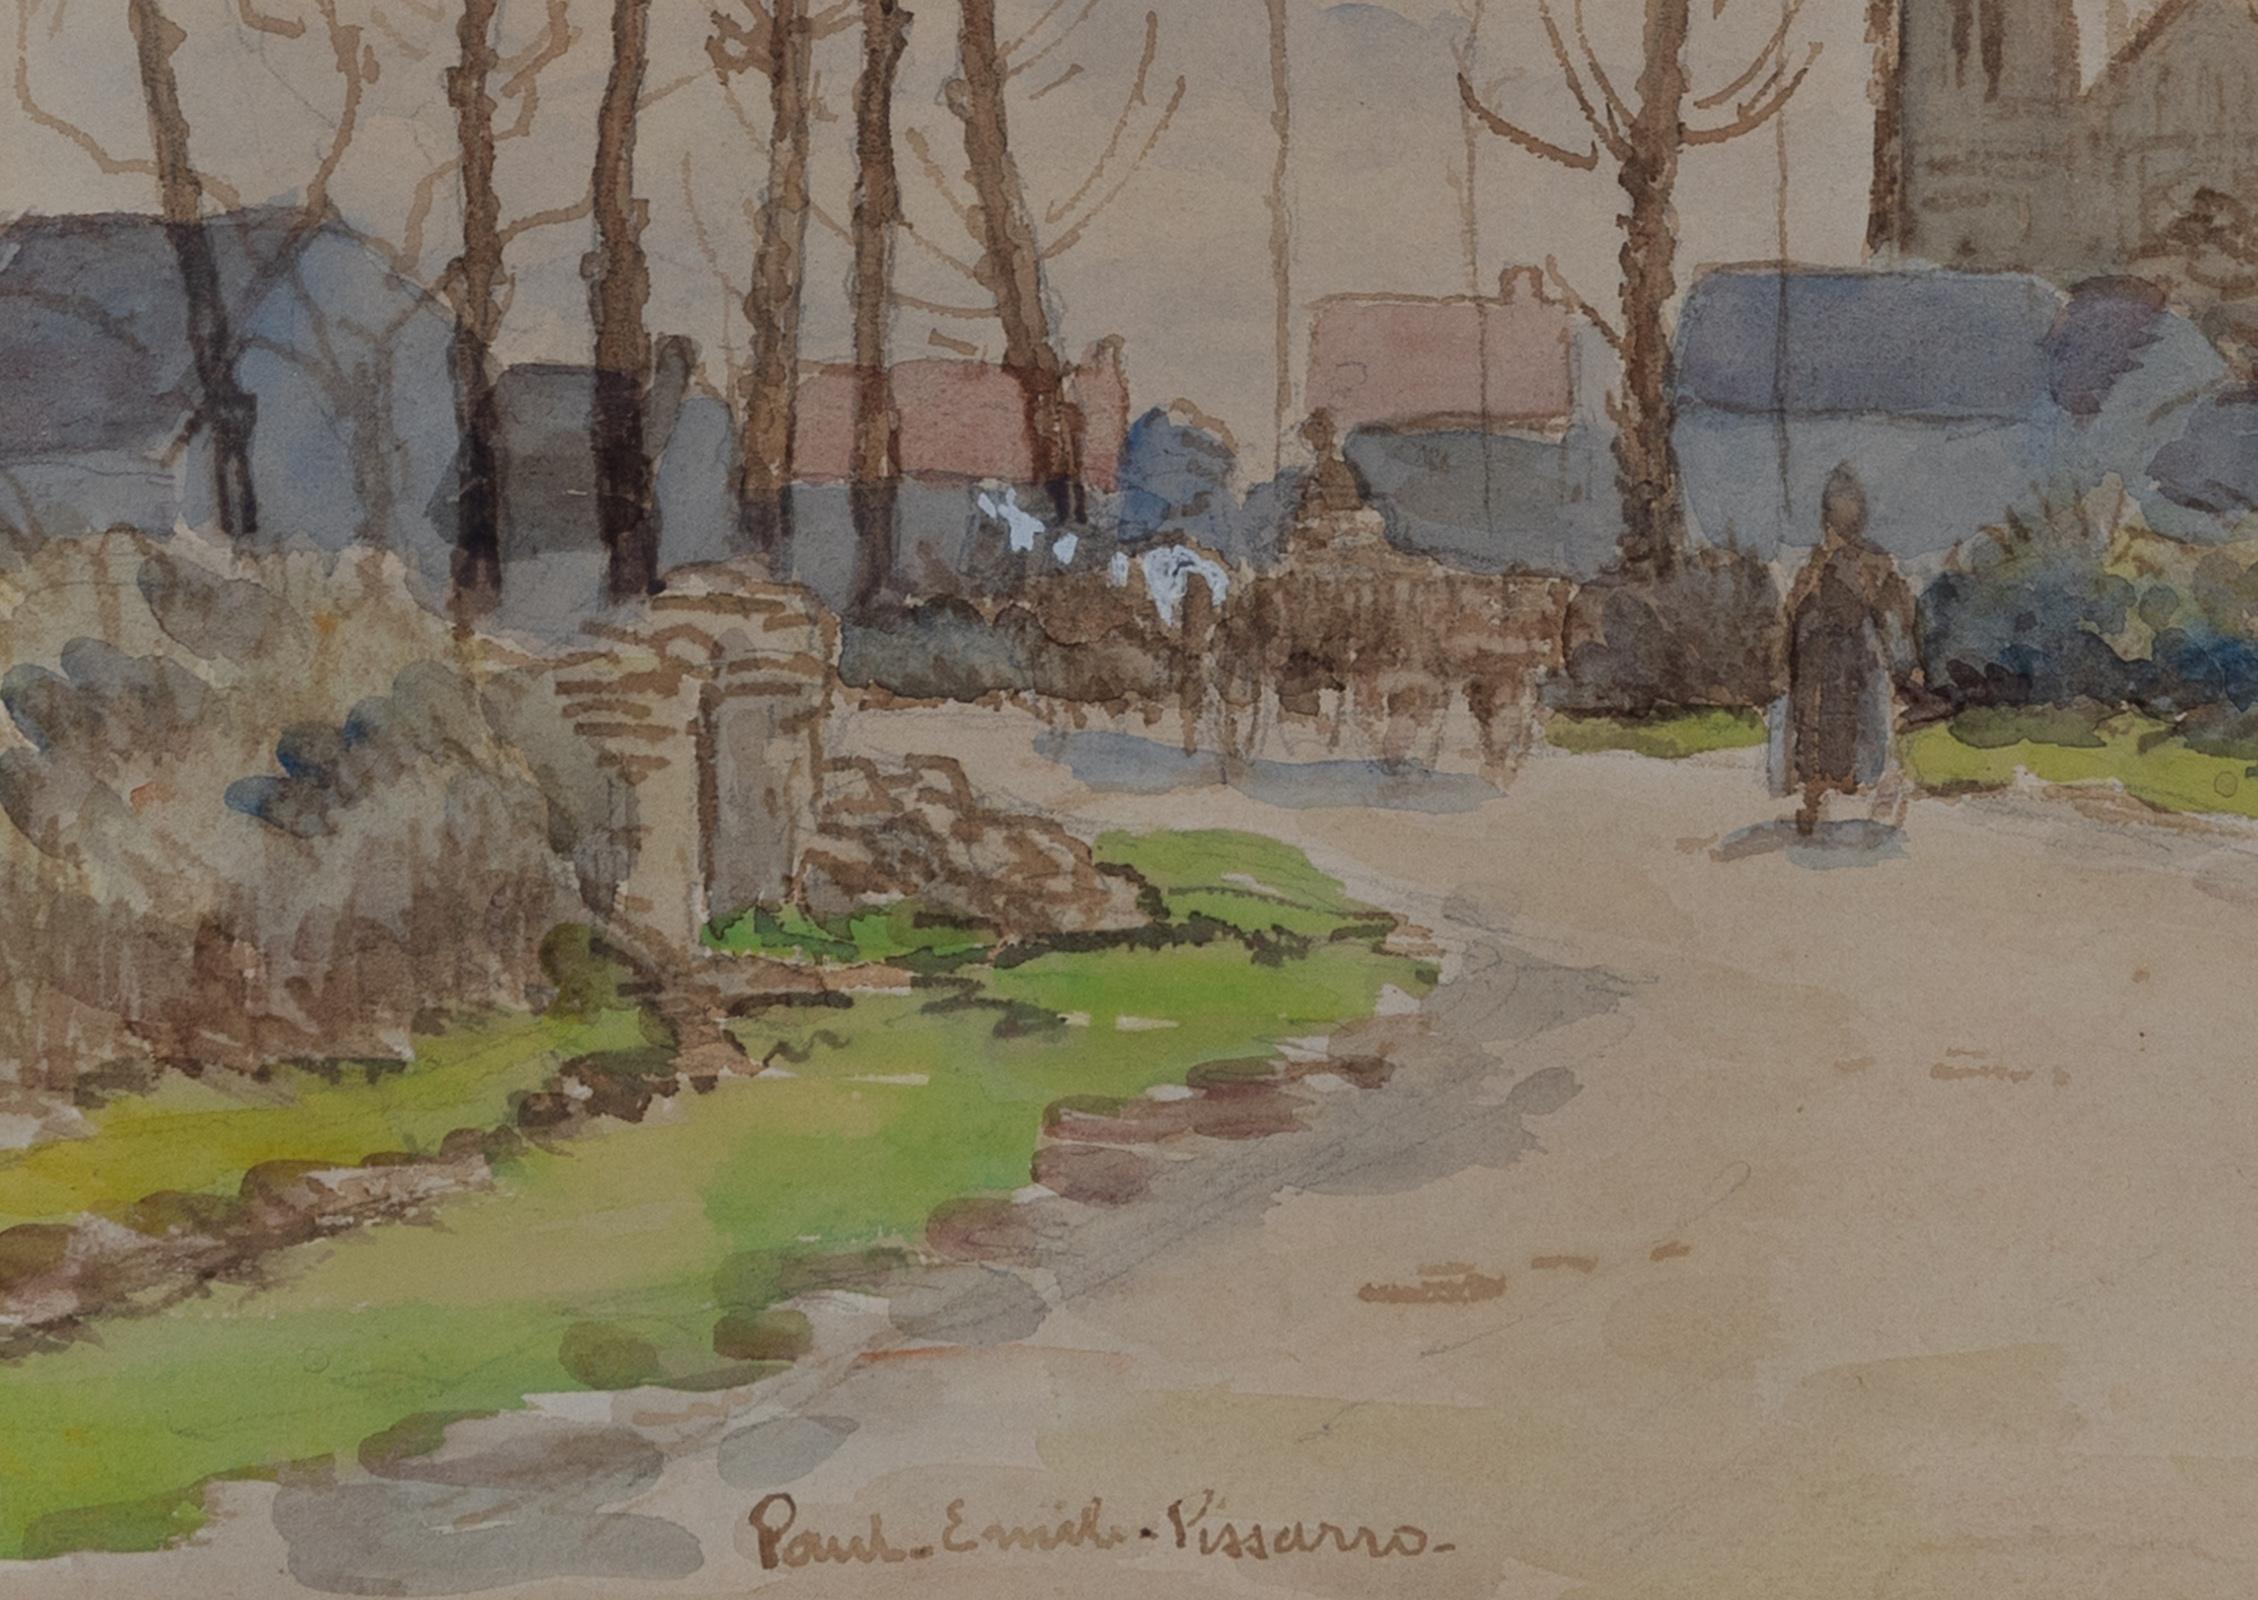 *UK BUYERS WILL PAY AN ADDITIONAL 5% IMPORT DUTY ON TOP OF THE ABOVE PRICE

Promeneuse sur un chemin by Paulémile Pissarro (1884-1972)
Watercolour and pencil on paper
30.5 x 35 cm (12 x 13 ³/₄ inches)
Signed lower left, Paul. Emile.